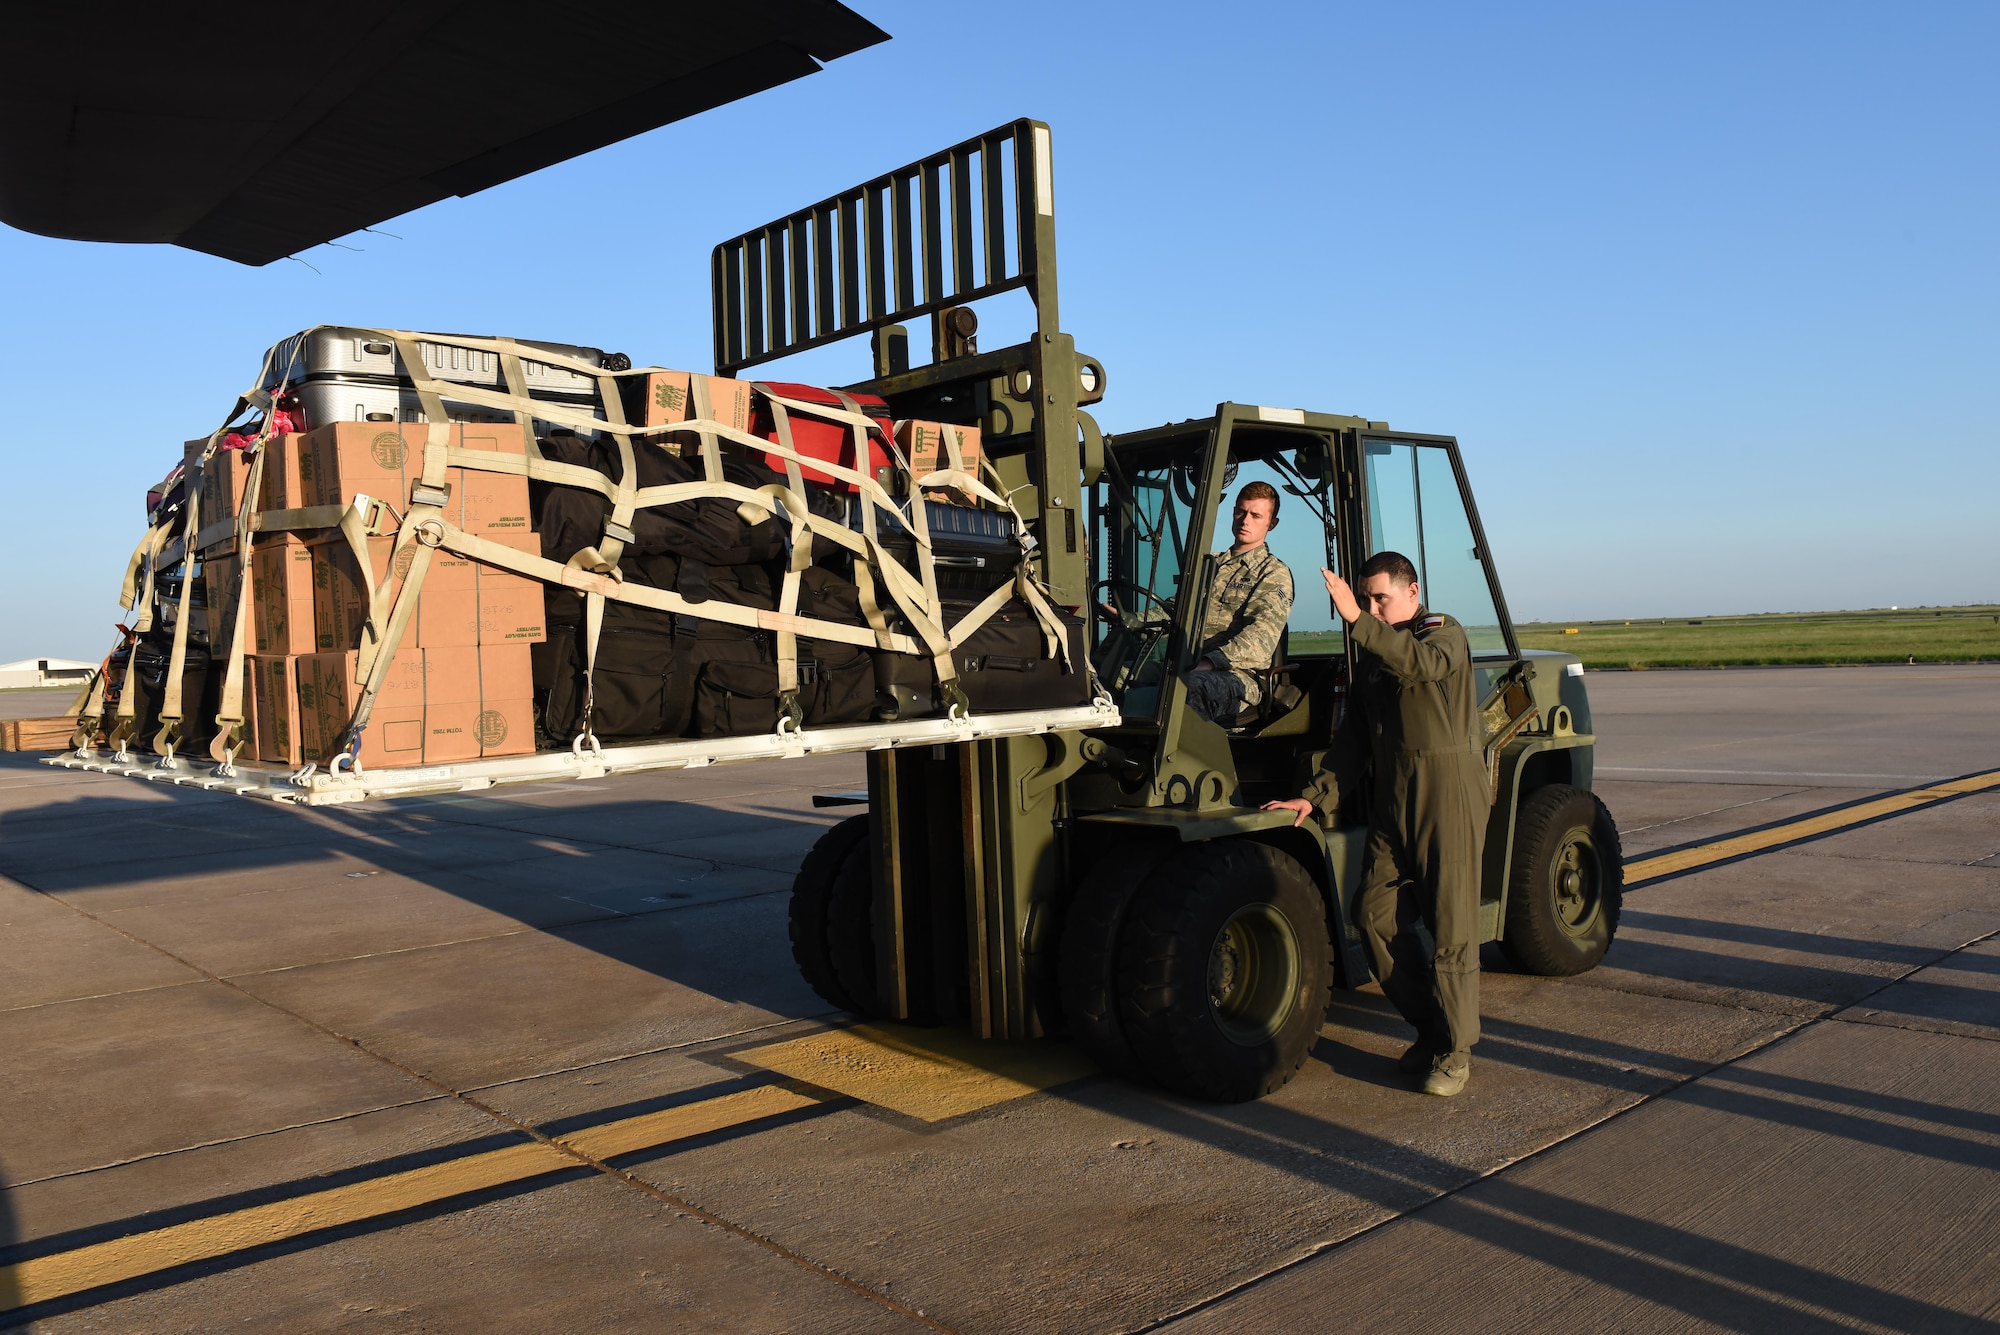 Senior Airman Benjamin Anderson, a 137 SOLRS small air terminal specialist, from Will Rogers Air National Guard Base in Oklahoma City, receives direction from a loadmaster from the 136th Airlift Wing, located at Naval Air Station Fort Worth Joint Reserve Base at Carswell Field, Texas, while loading a pallet of medical equipment and supplies onto a C-130 Hercules from the 136 AW, Aug. 28, 2017, at Will Rogers Air National Guard Base. The 137th Special Operations Wing deployed about 40 medical and aeromedical evacuation Airmen and equipment in support of the Texas Military Department and their relief efforts following Hurricane Harvey. (U.S. Air National Guard photo by Staff Sgt. Kasey Phipps/Released)